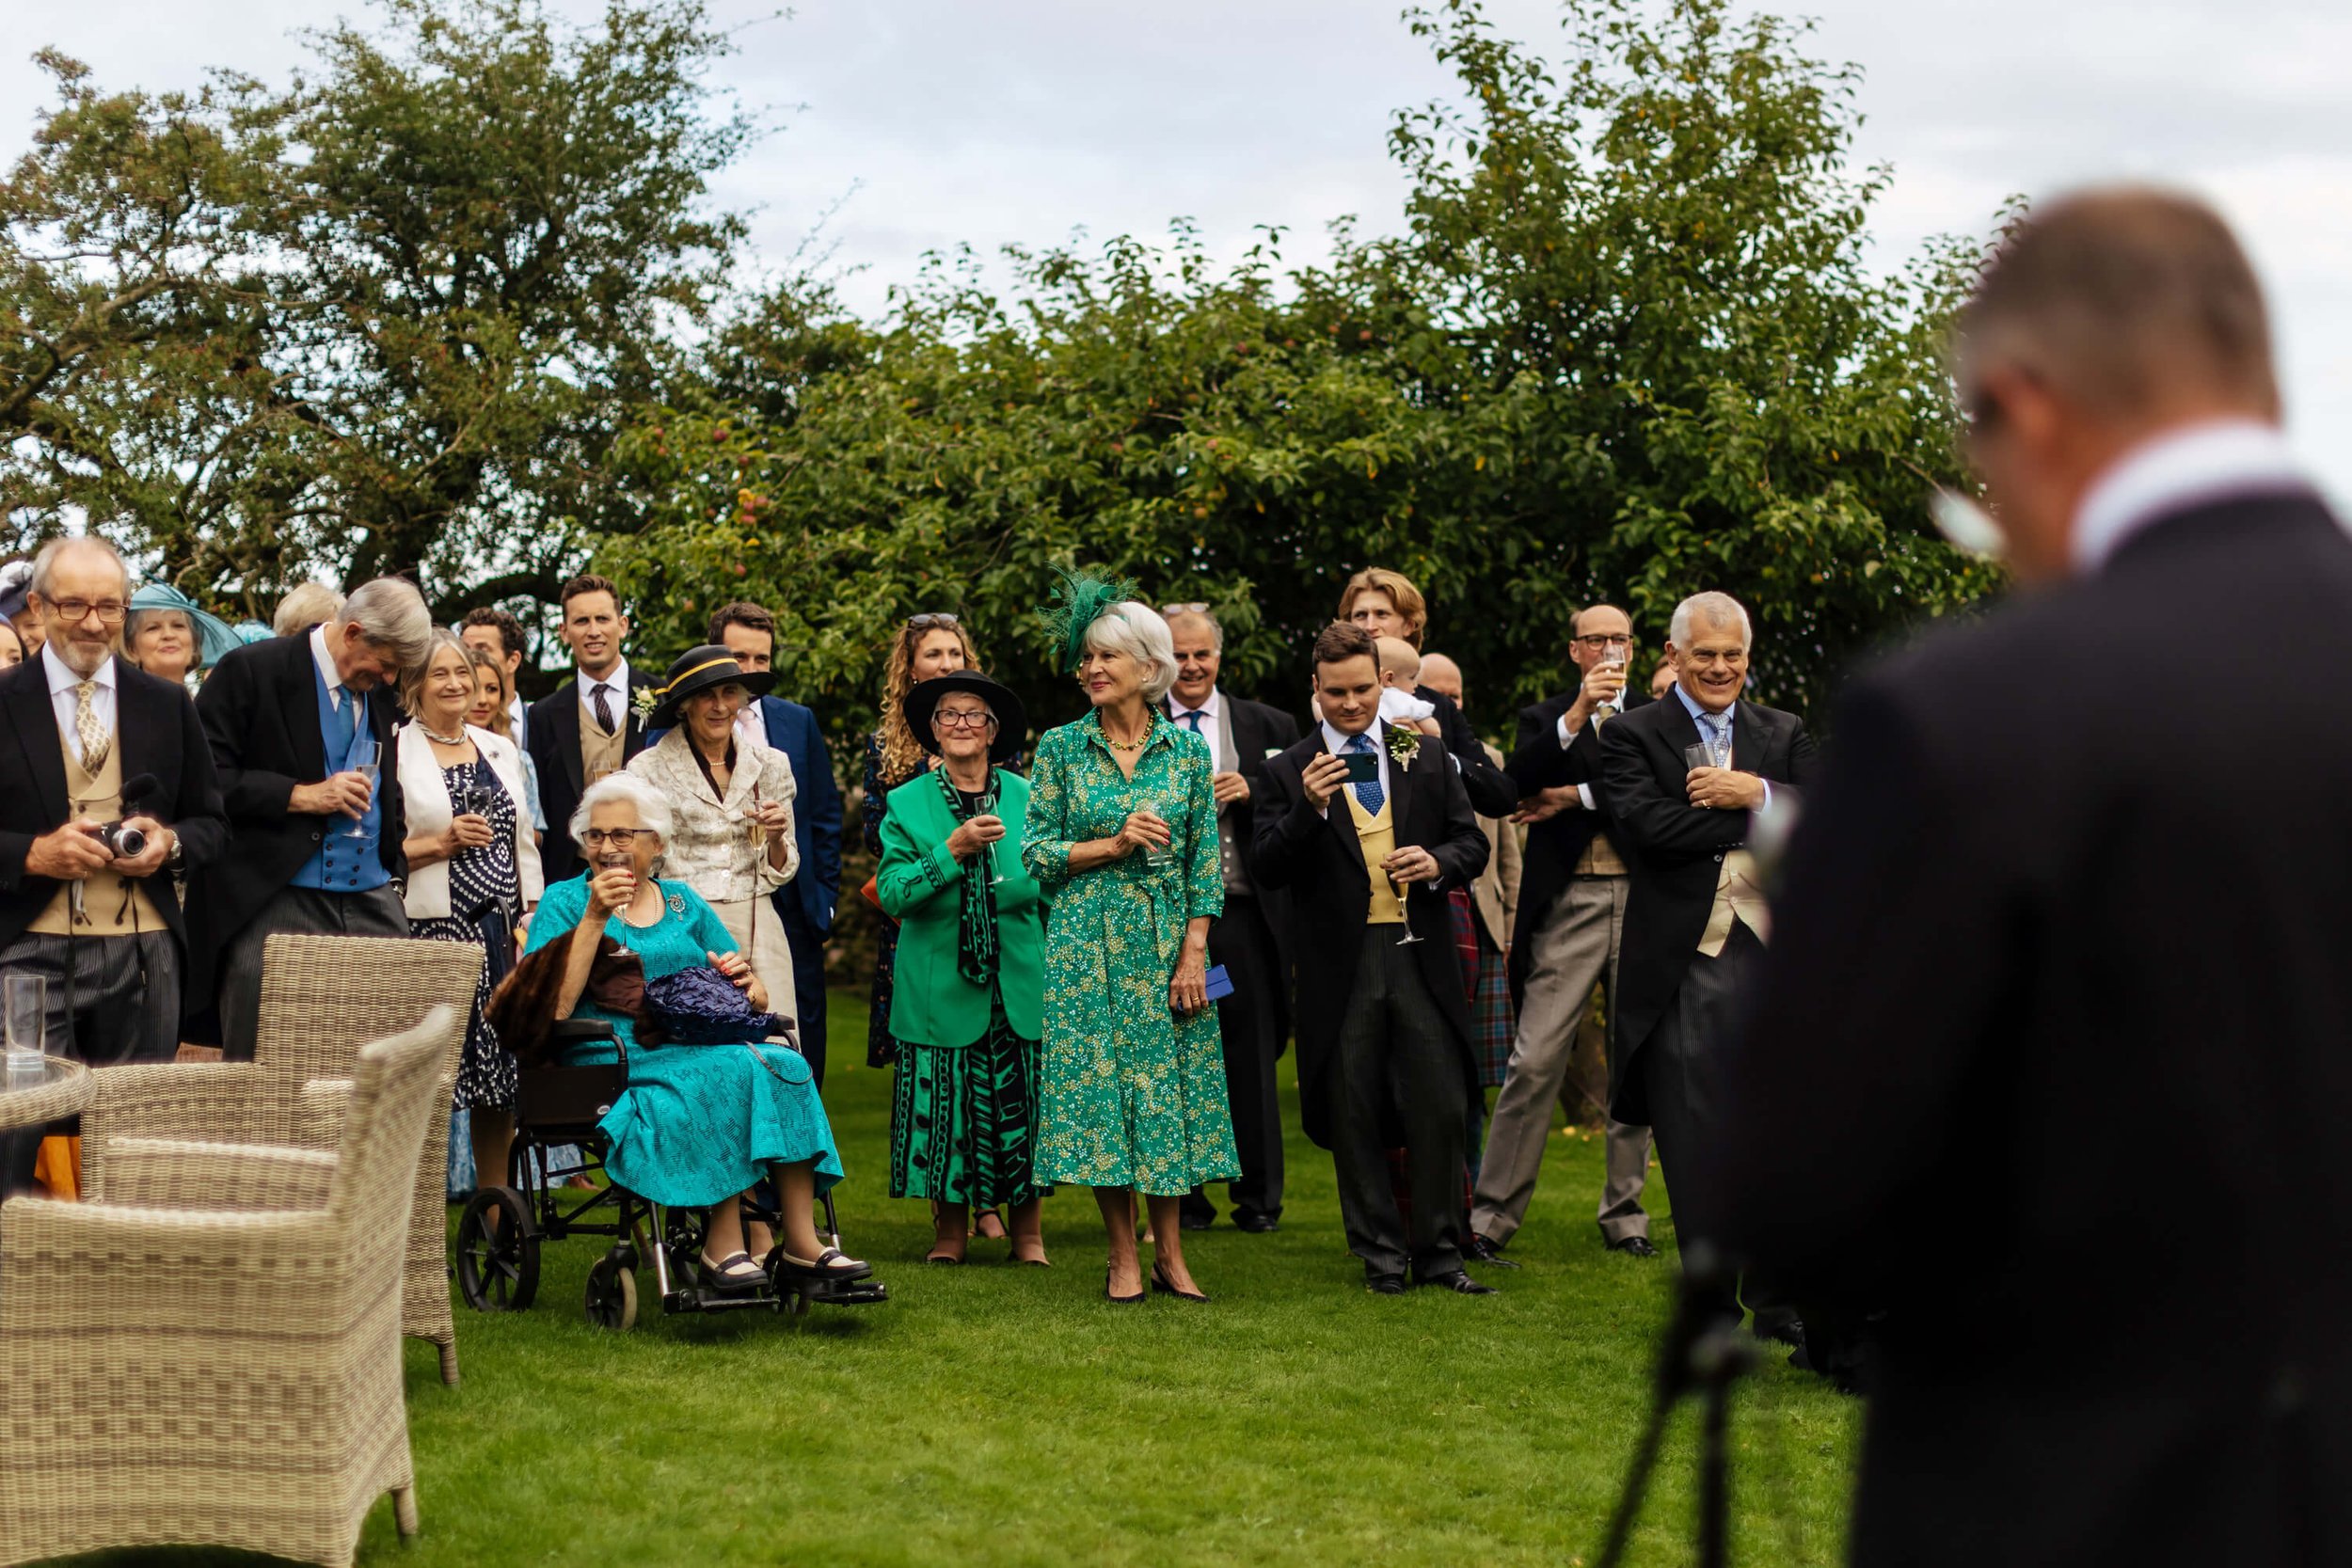 Wedding guests during the speeches in the garden